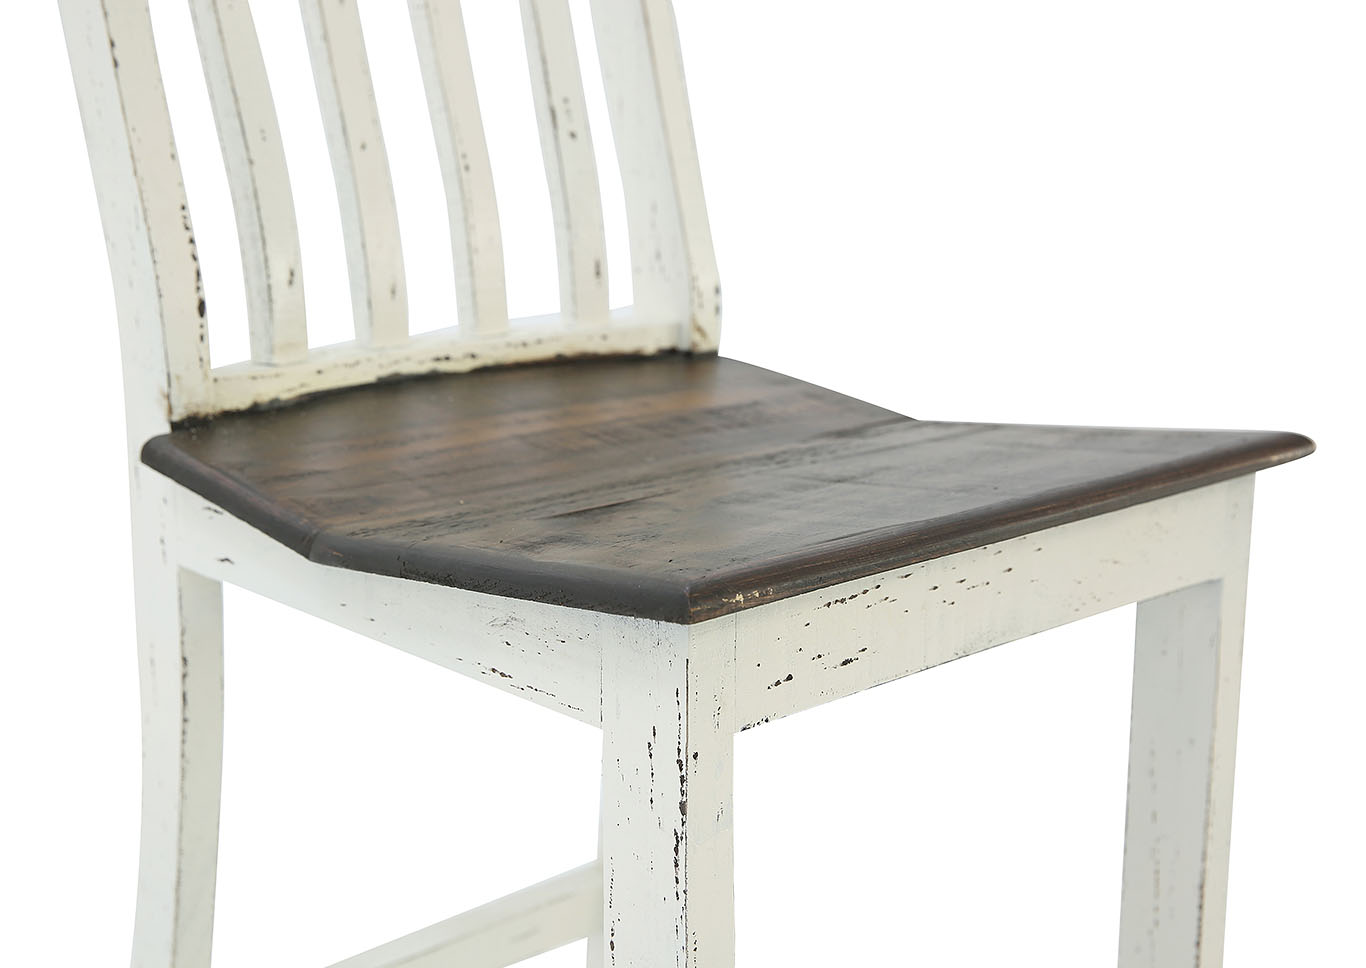 SANTA RITA  COUNTER HEIGHT DINING CHAIR,RUSTIC IMPORTS